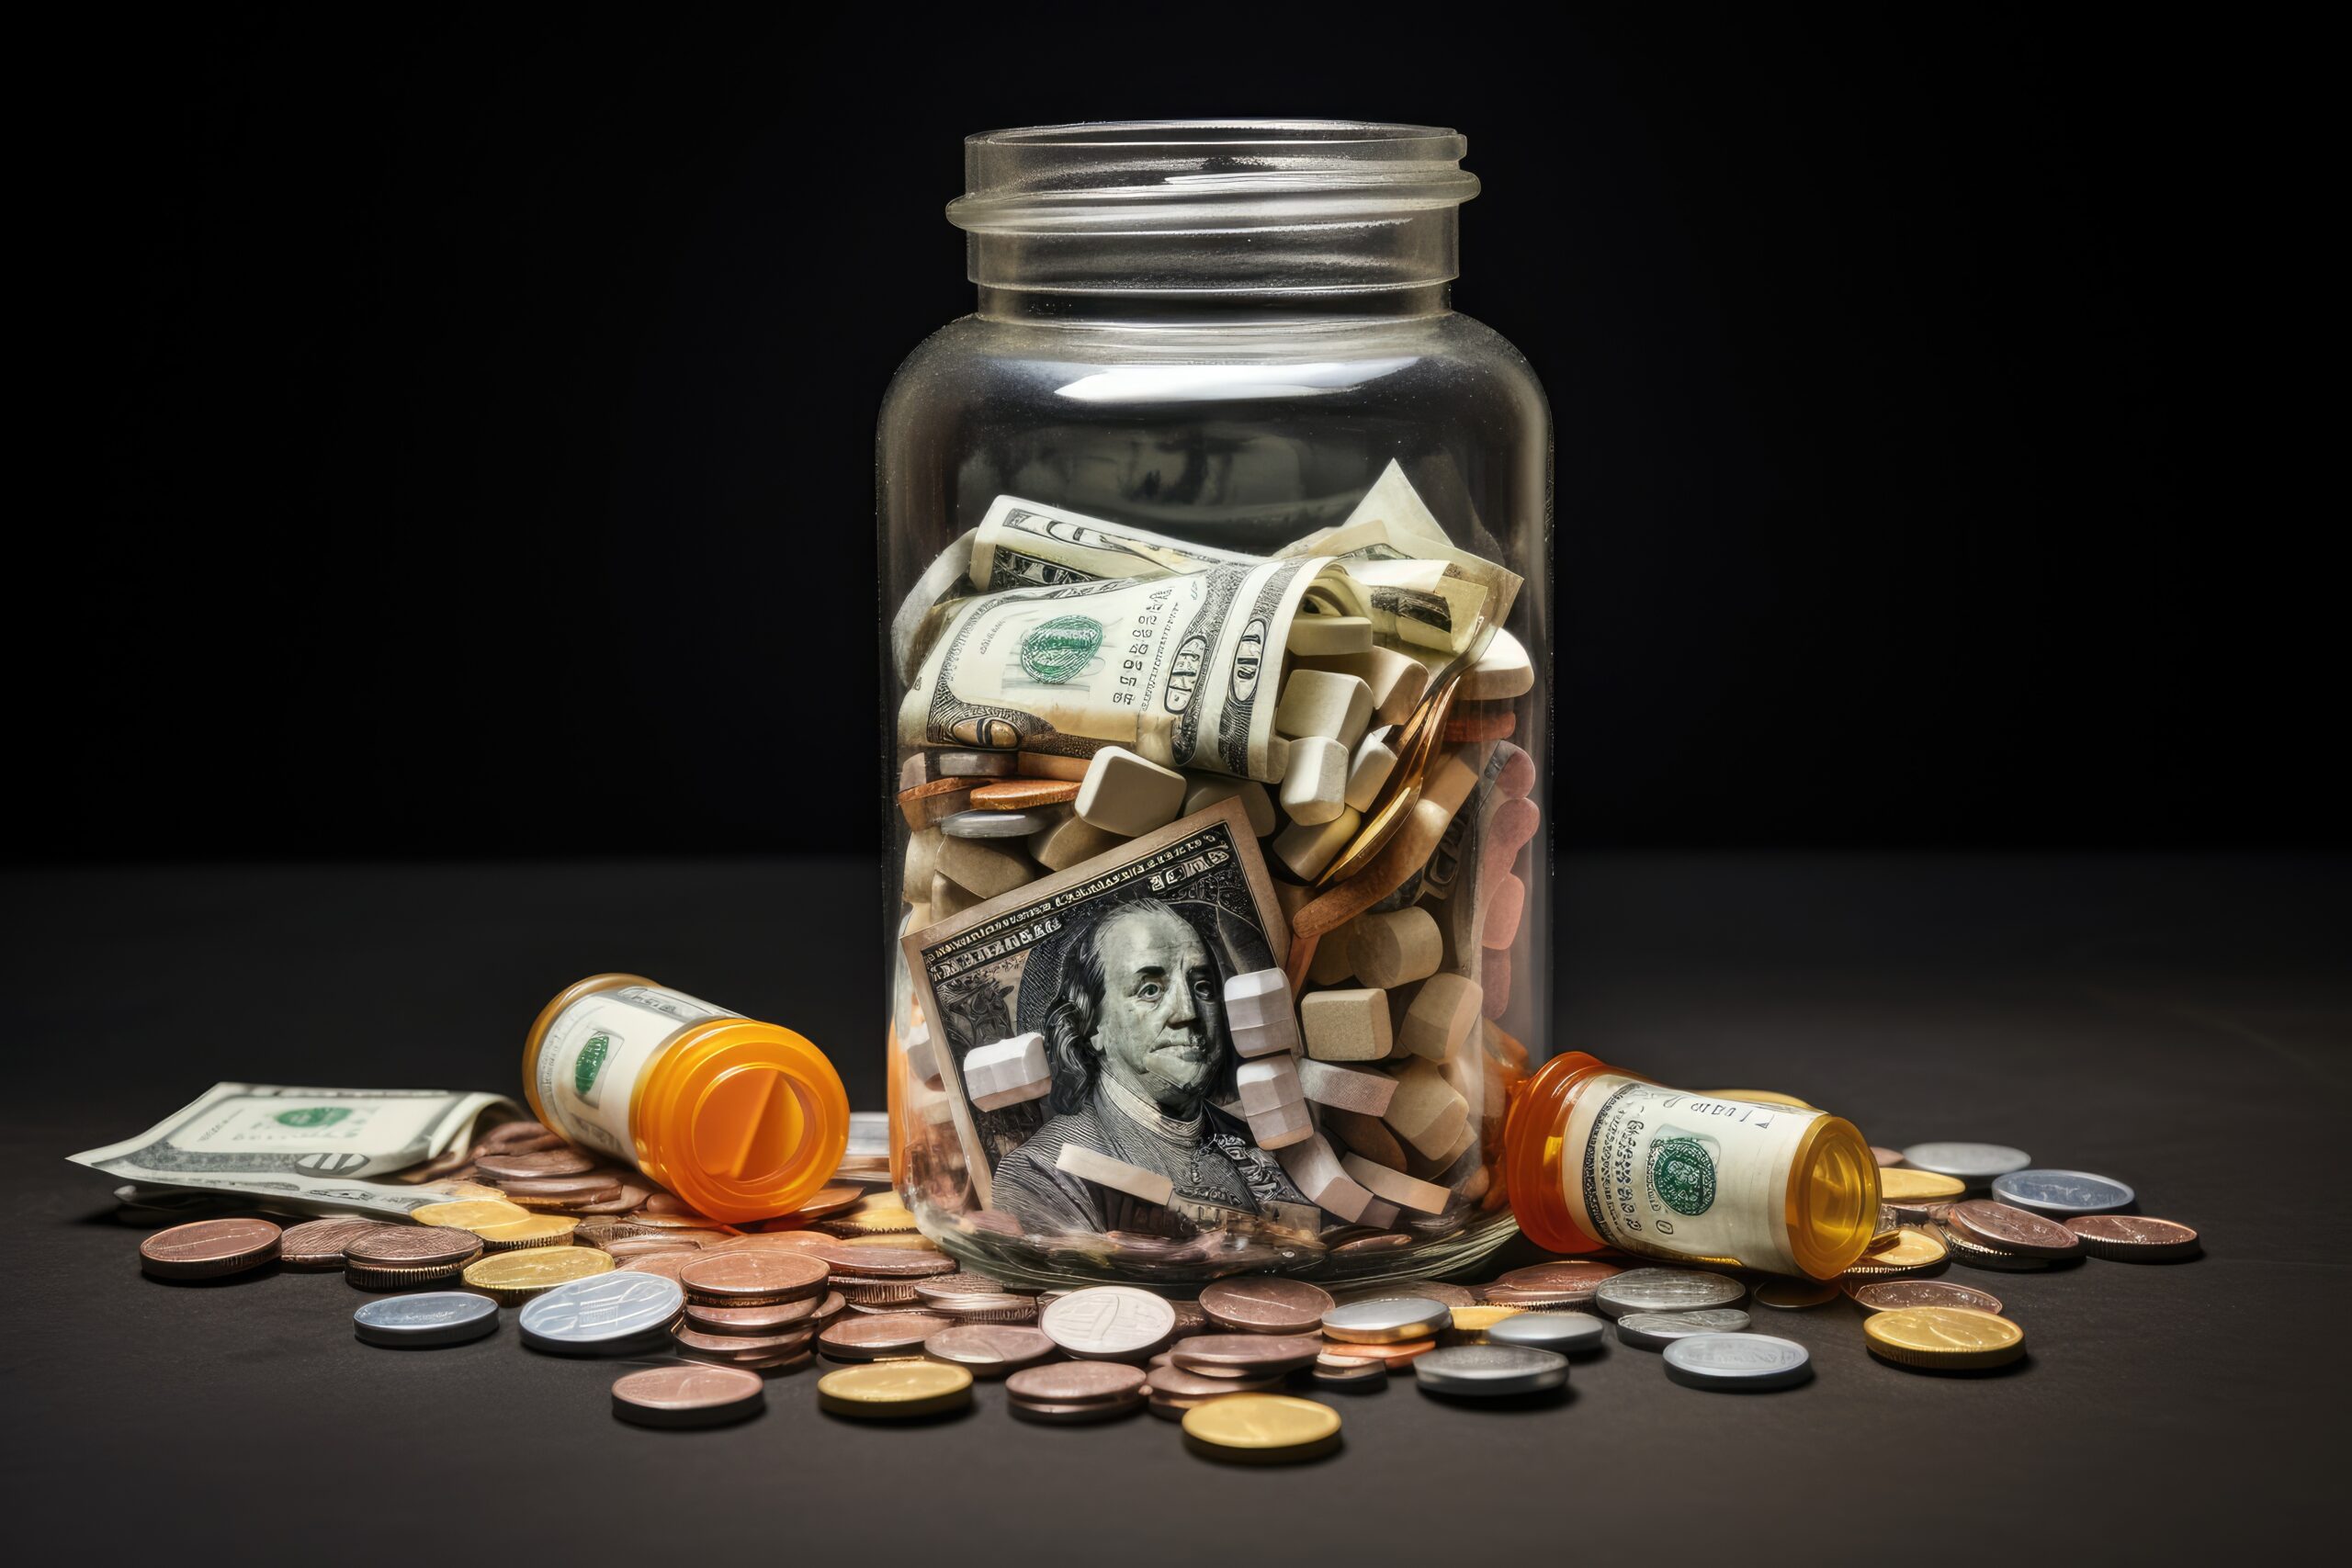 https://www.vecteezy.com/photo/31734425-glass-jar-full-of-money-and-coins-on-a-black-background-saving-concept-expensive-medicine-contempt-with-money-and-medicine-ai-generated